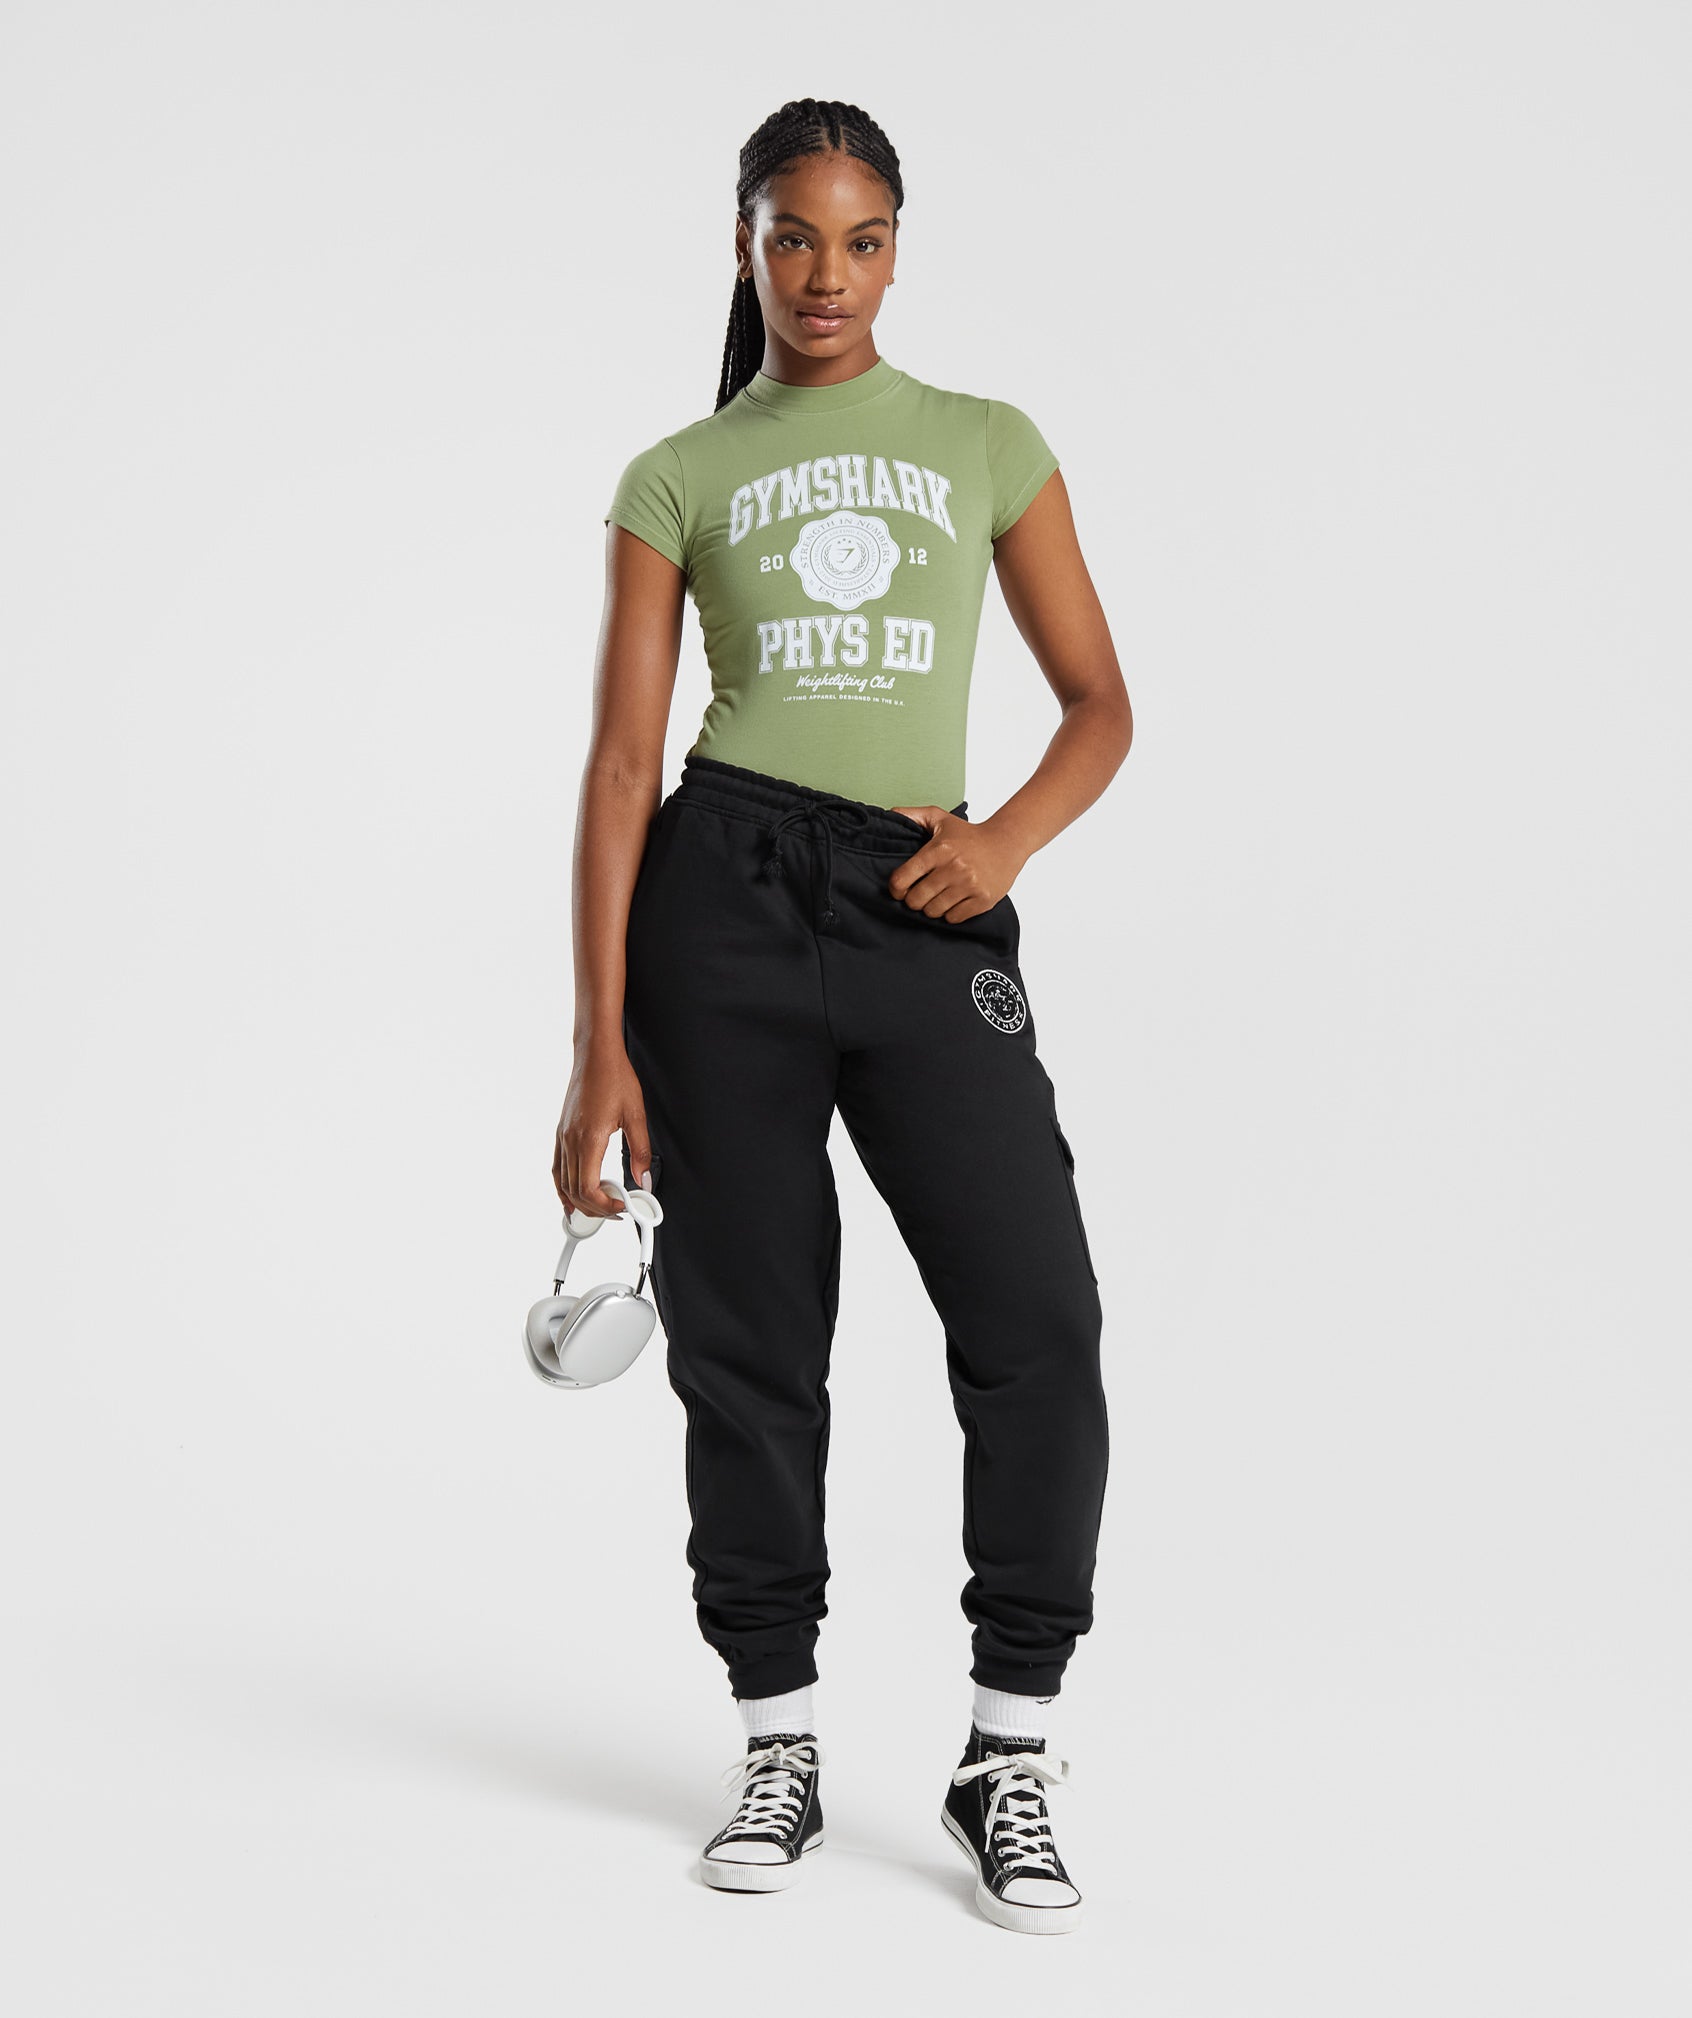 Phys Ed Graphic Body Fit T-Shirt in Light Sage Green - view 2